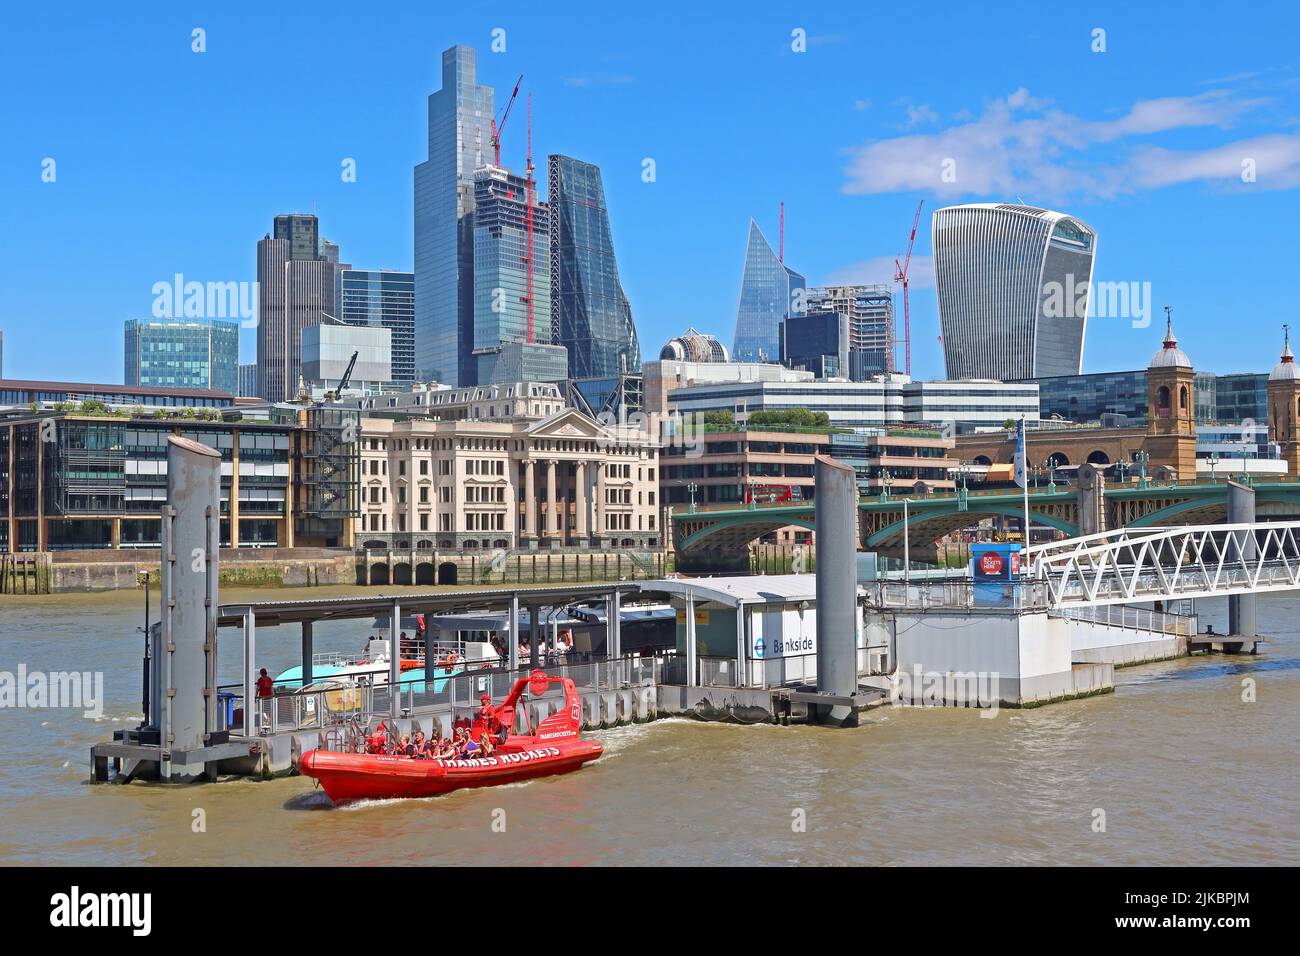 Bankside south of the river, looking over to the City of London, with red Thames Rocket RIB boat, in the foreground, London, England, UK, SE1 9DT Stock Photo